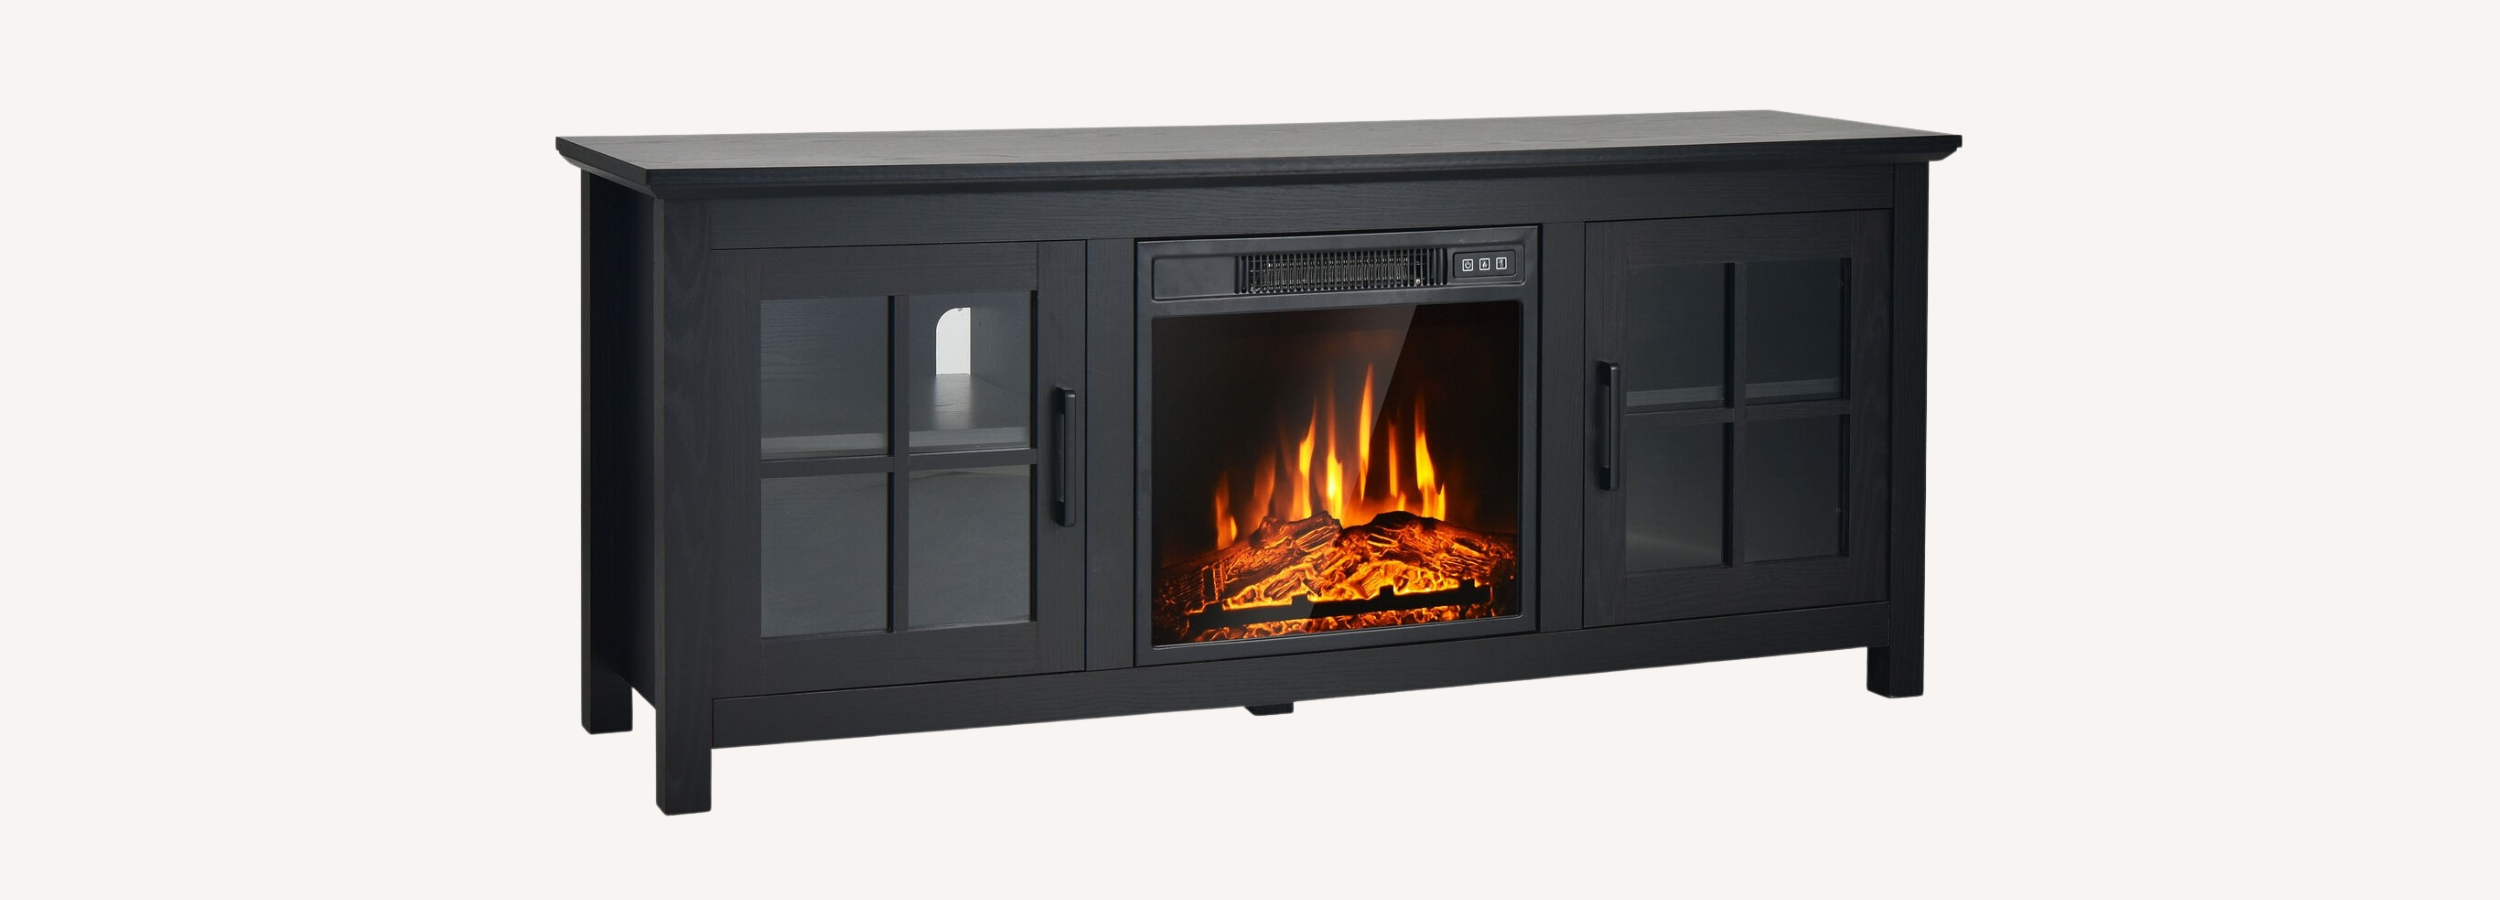 tv stand fireplaces on sale today 